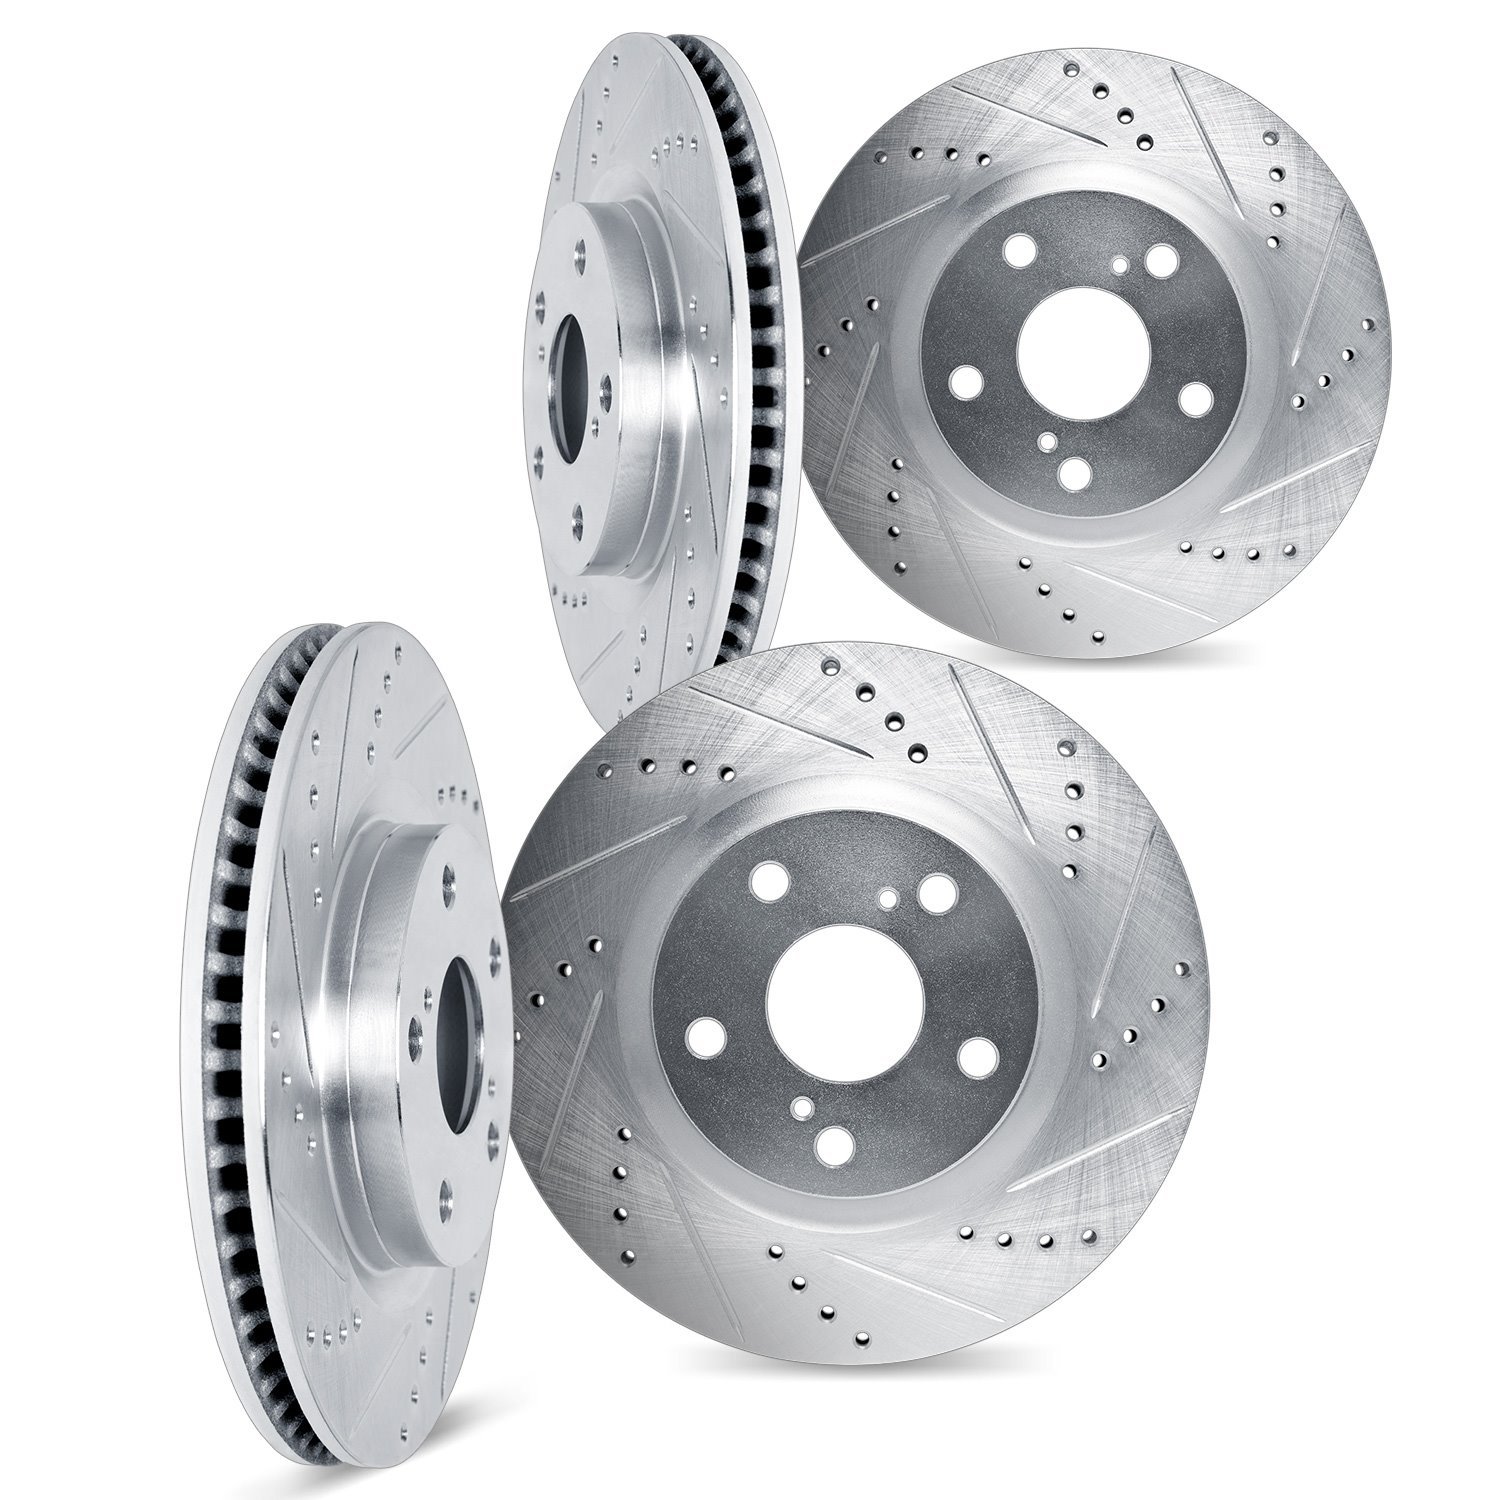 7004-75018 Drilled/Slotted Brake Rotors [Silver], Fits Select Lexus/Toyota/Scion, Position: Front and Rear